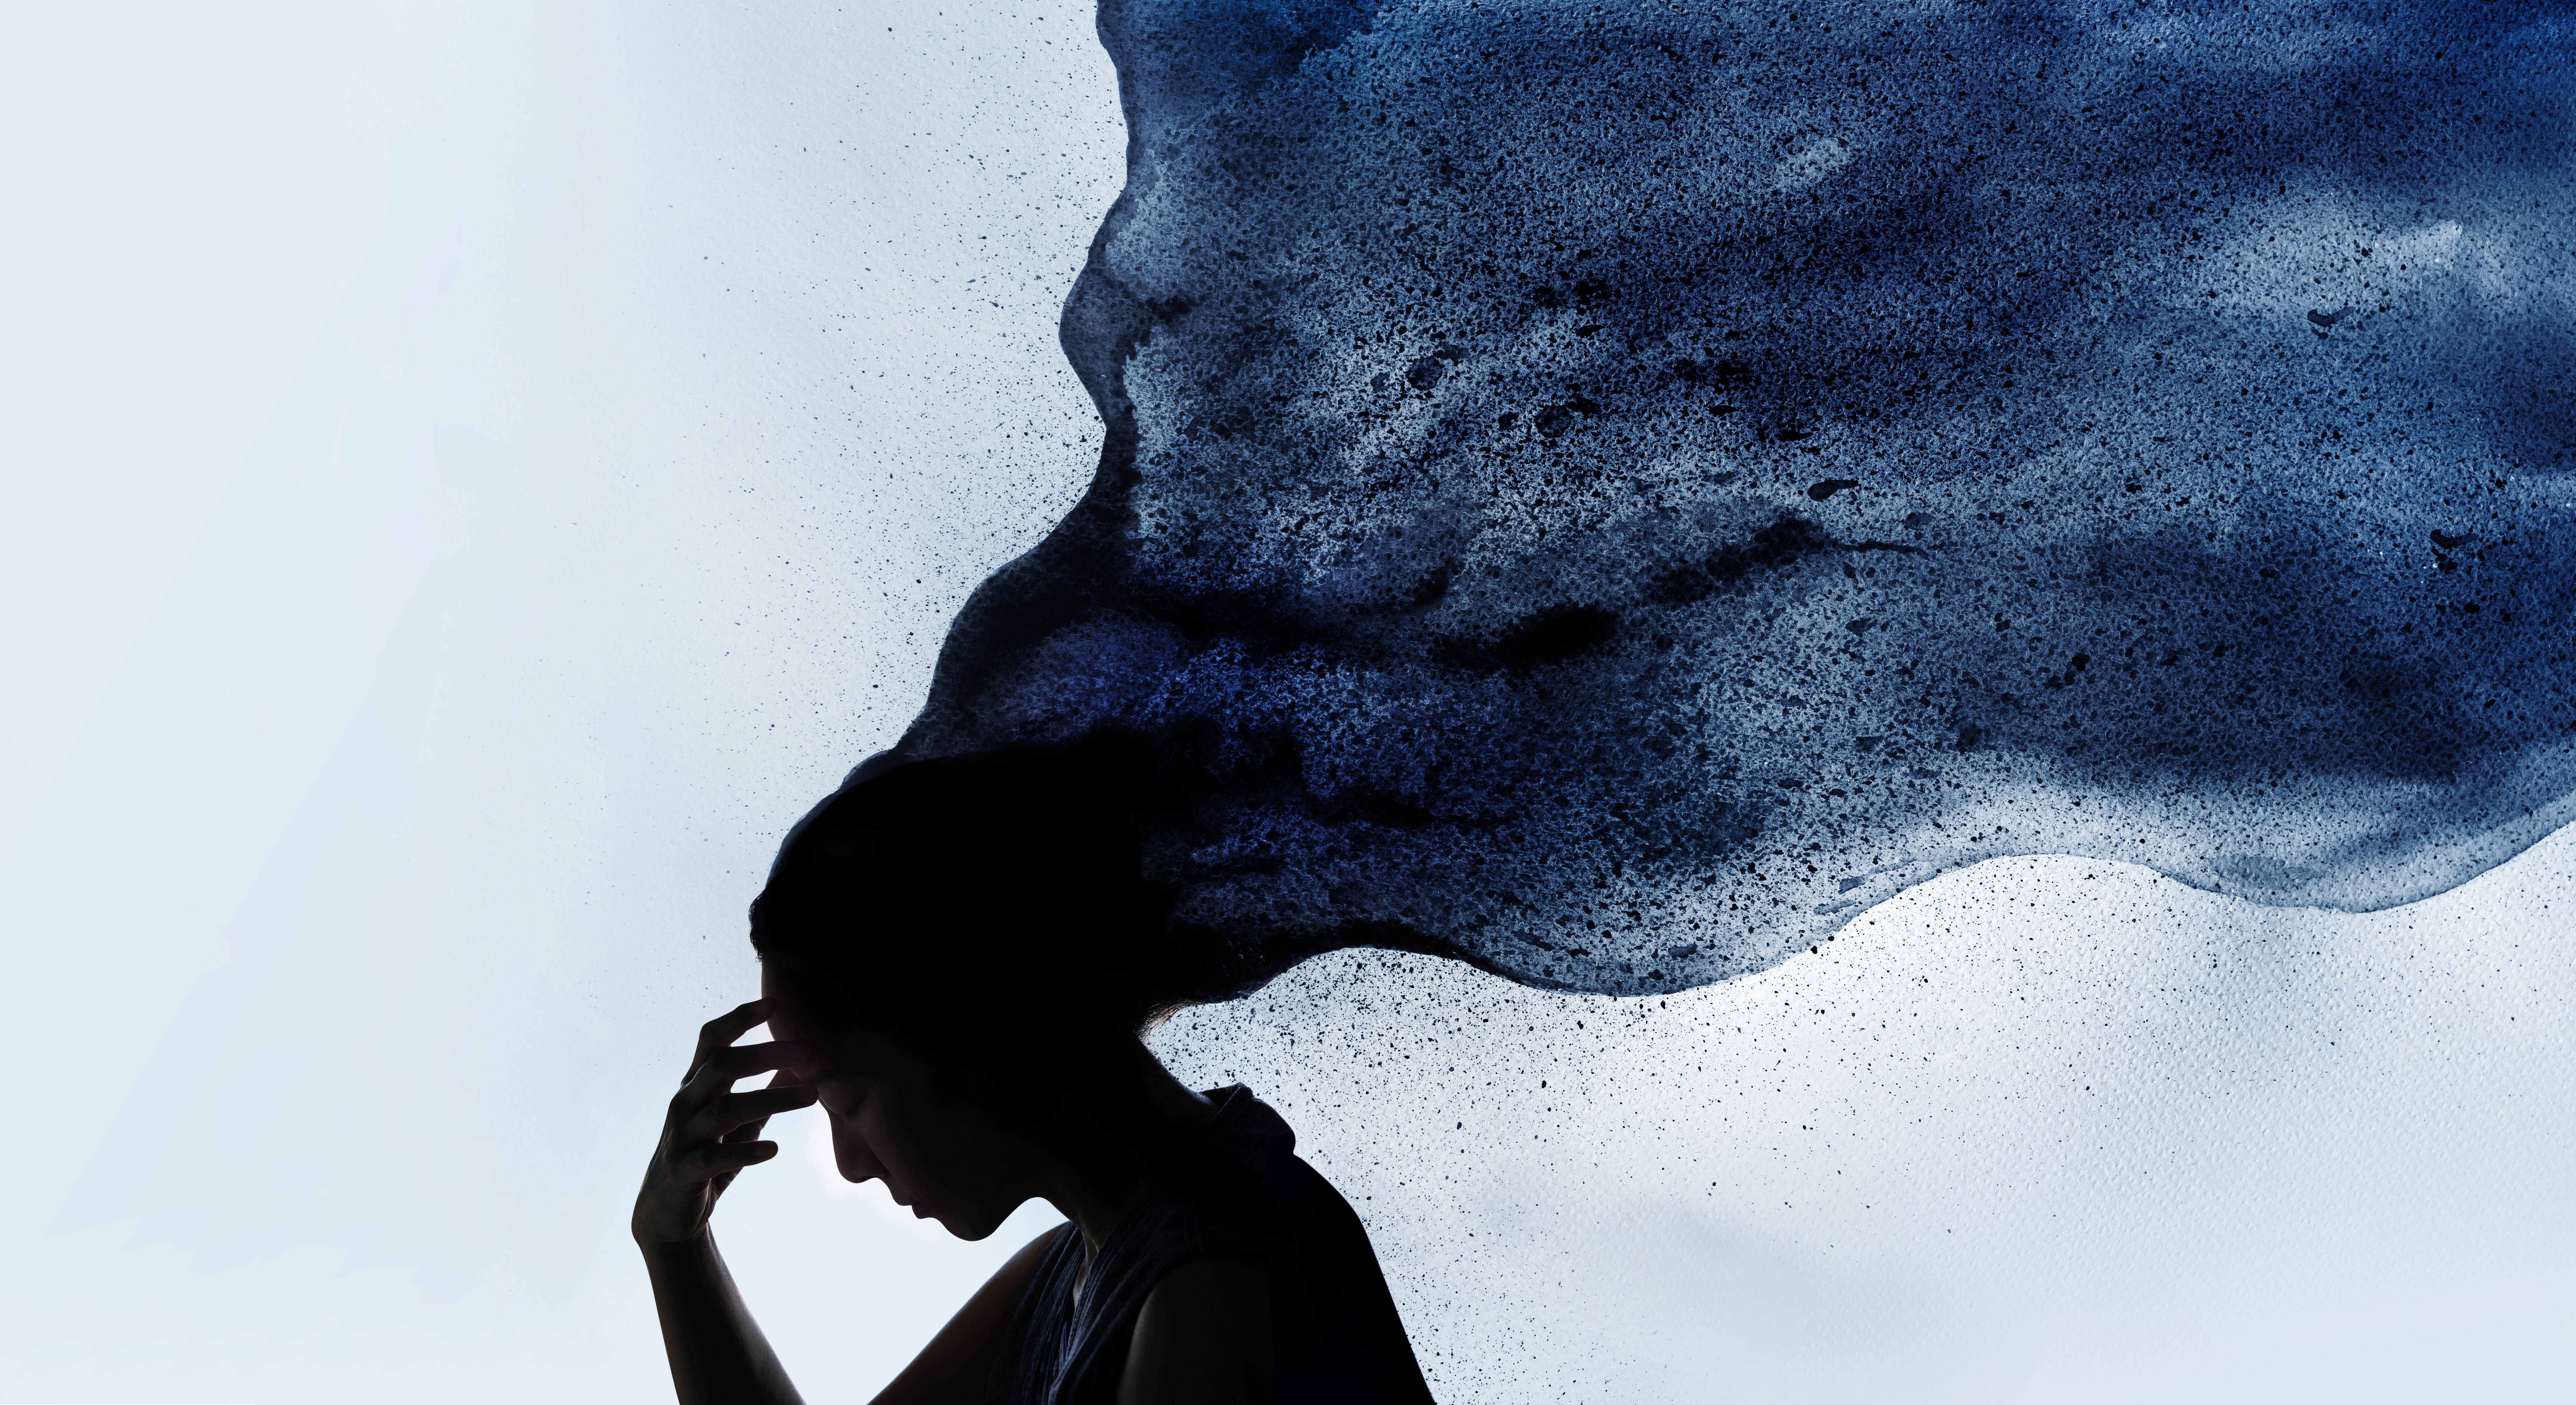 Depiction of mental health with a person experiencing a dark cloud around their head